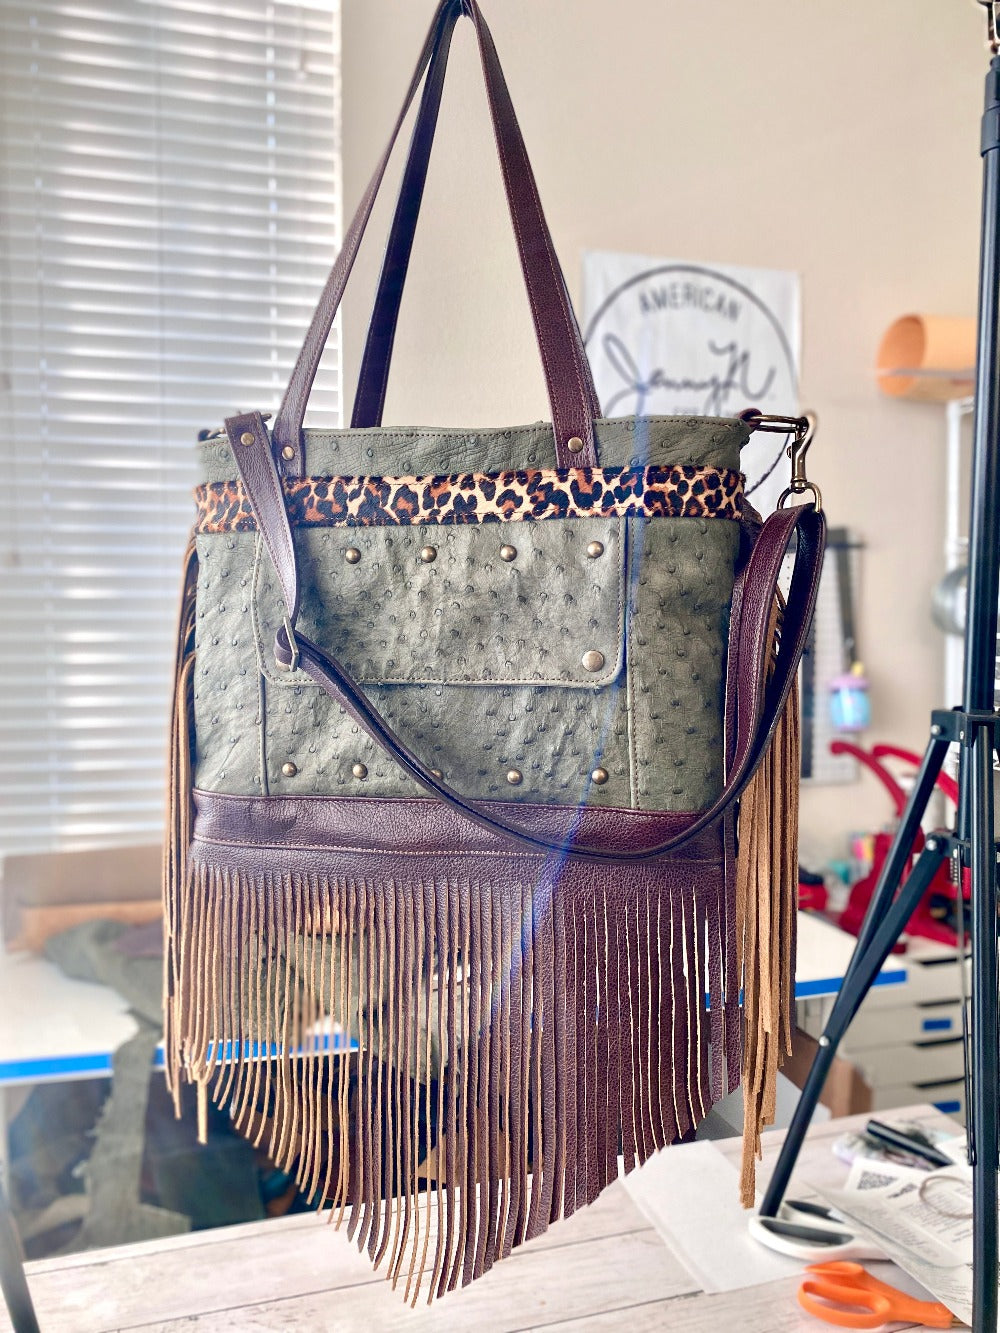 Rhonda's Custom Archive Mini in Moss Ostrich with Dark Roast cowskin leather accents, Leopard print cowskin top stripe accent, antique brass hardware, and lots of Dark Roast leather fringe on the sides and bottom